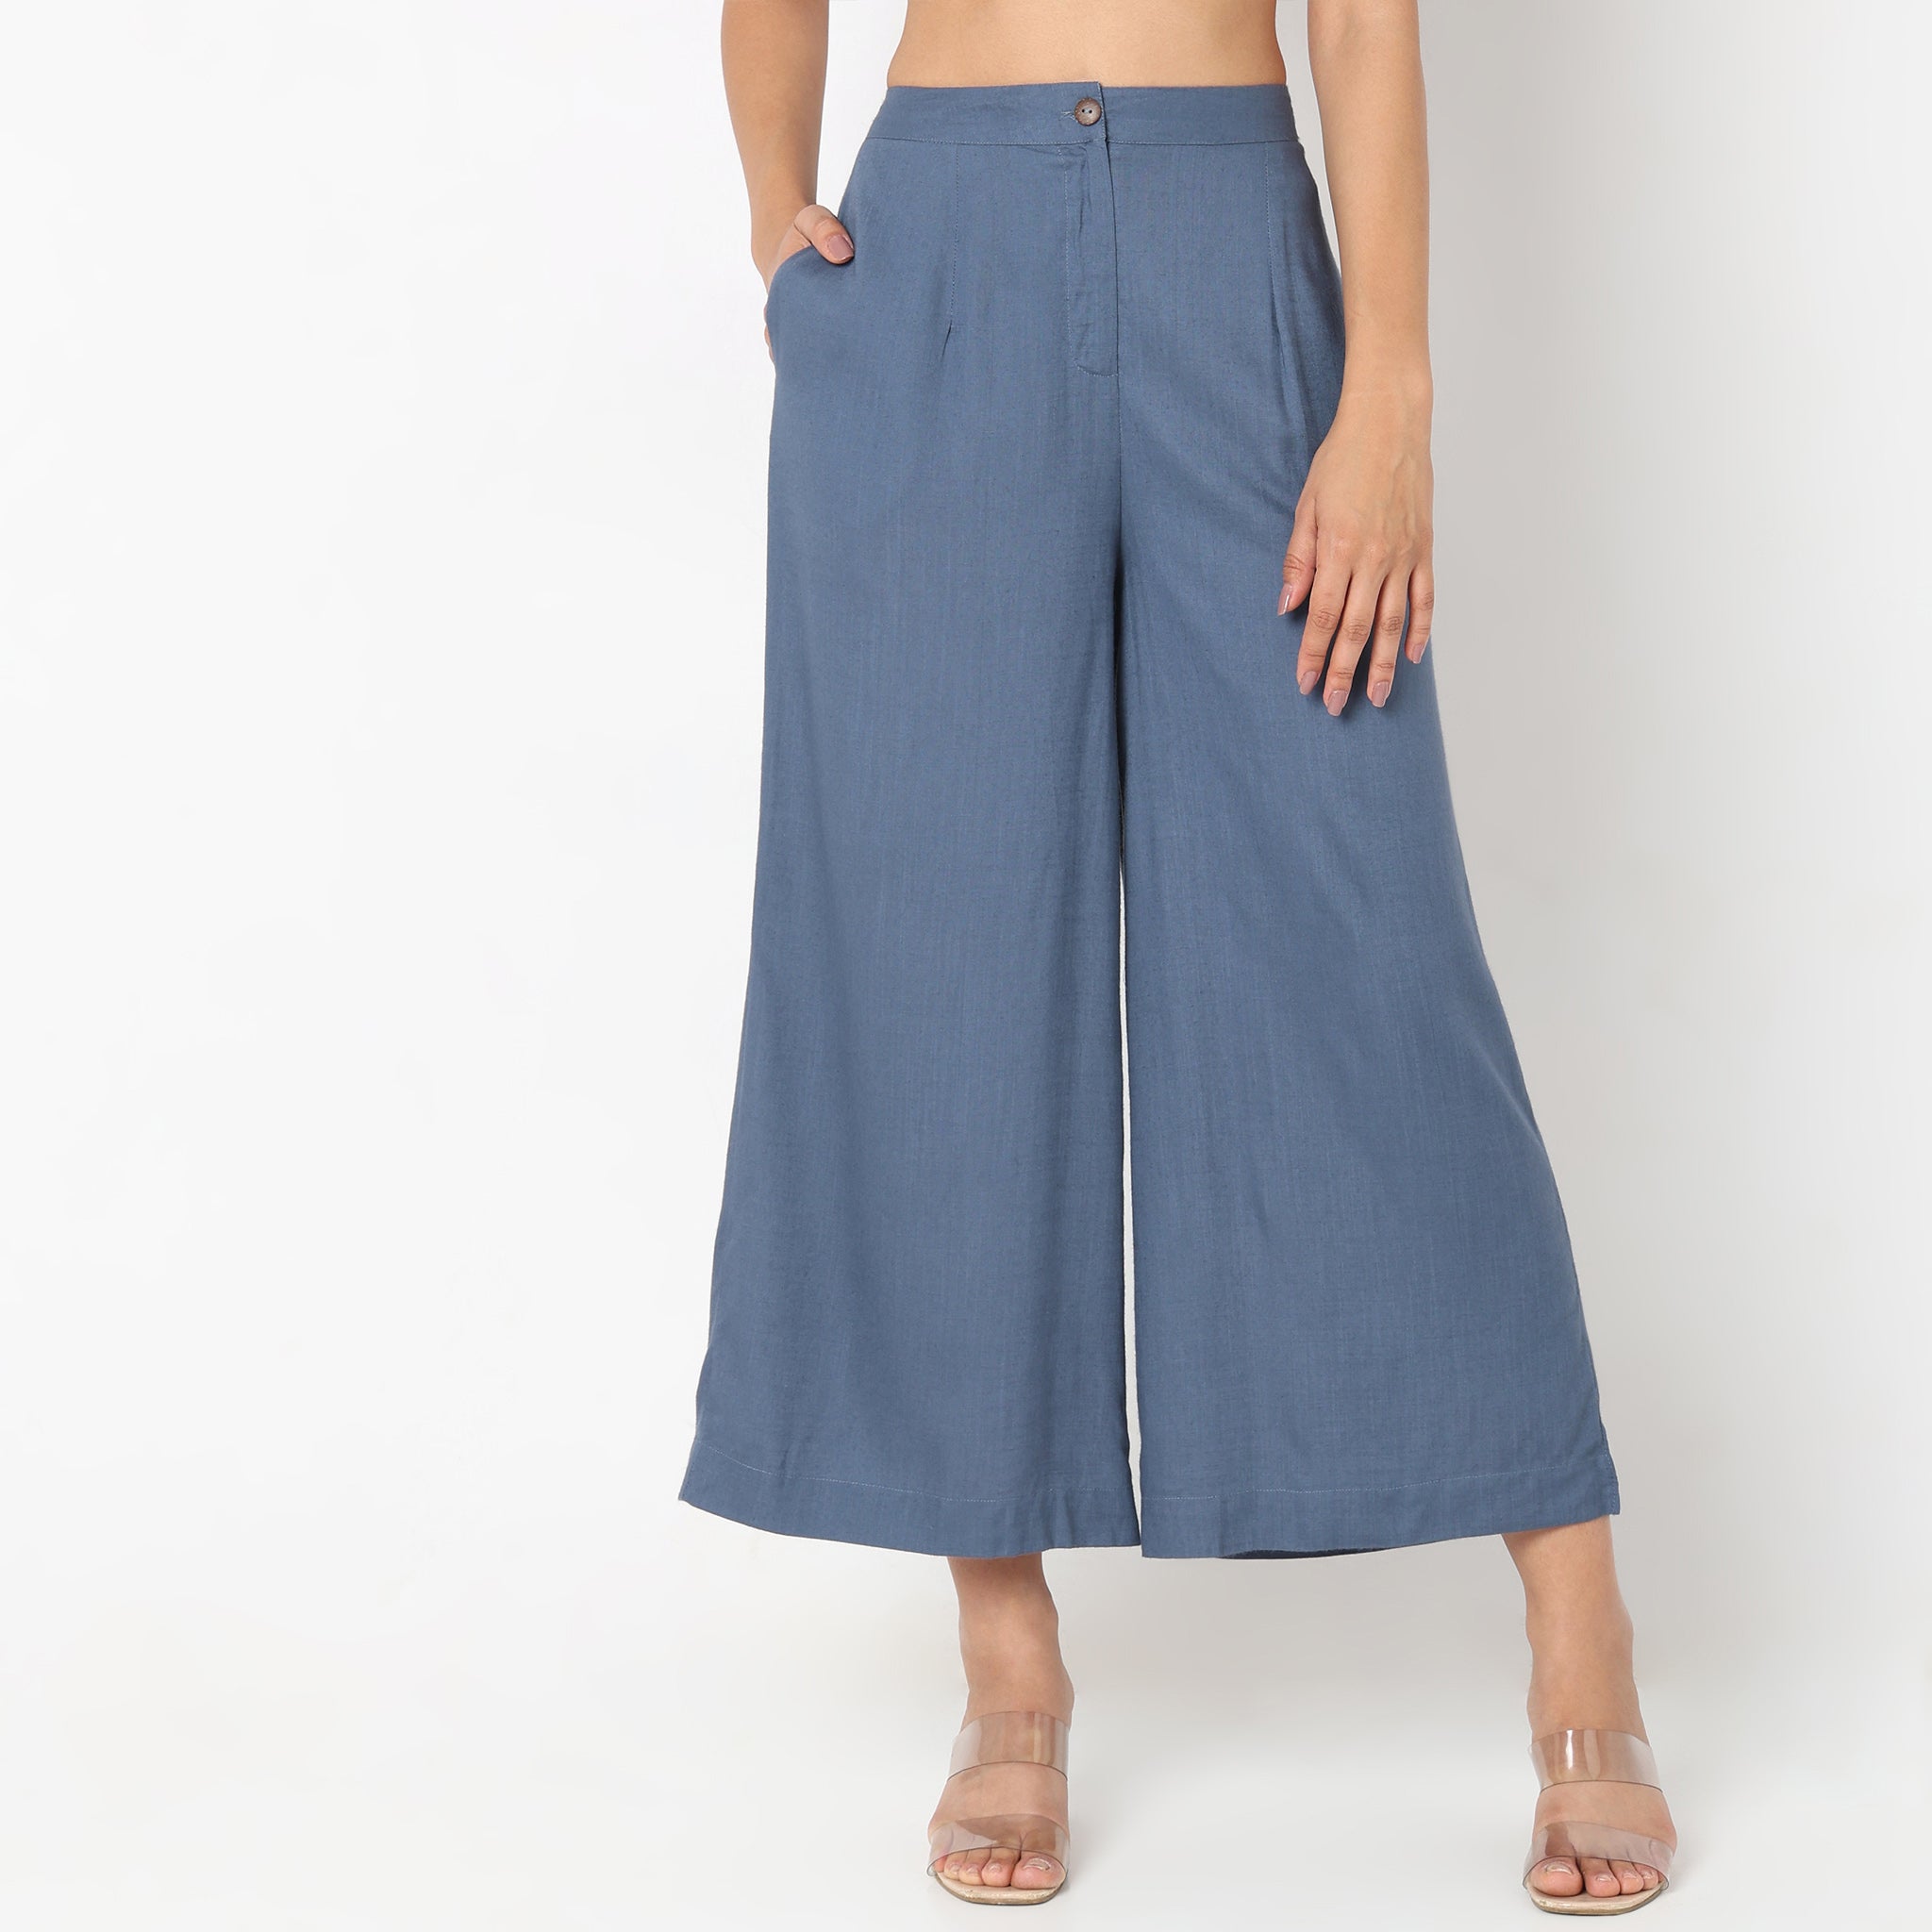 Buy Sky Blue Trousers & Pants for Women by Marks & Spencer Online | Ajio.com